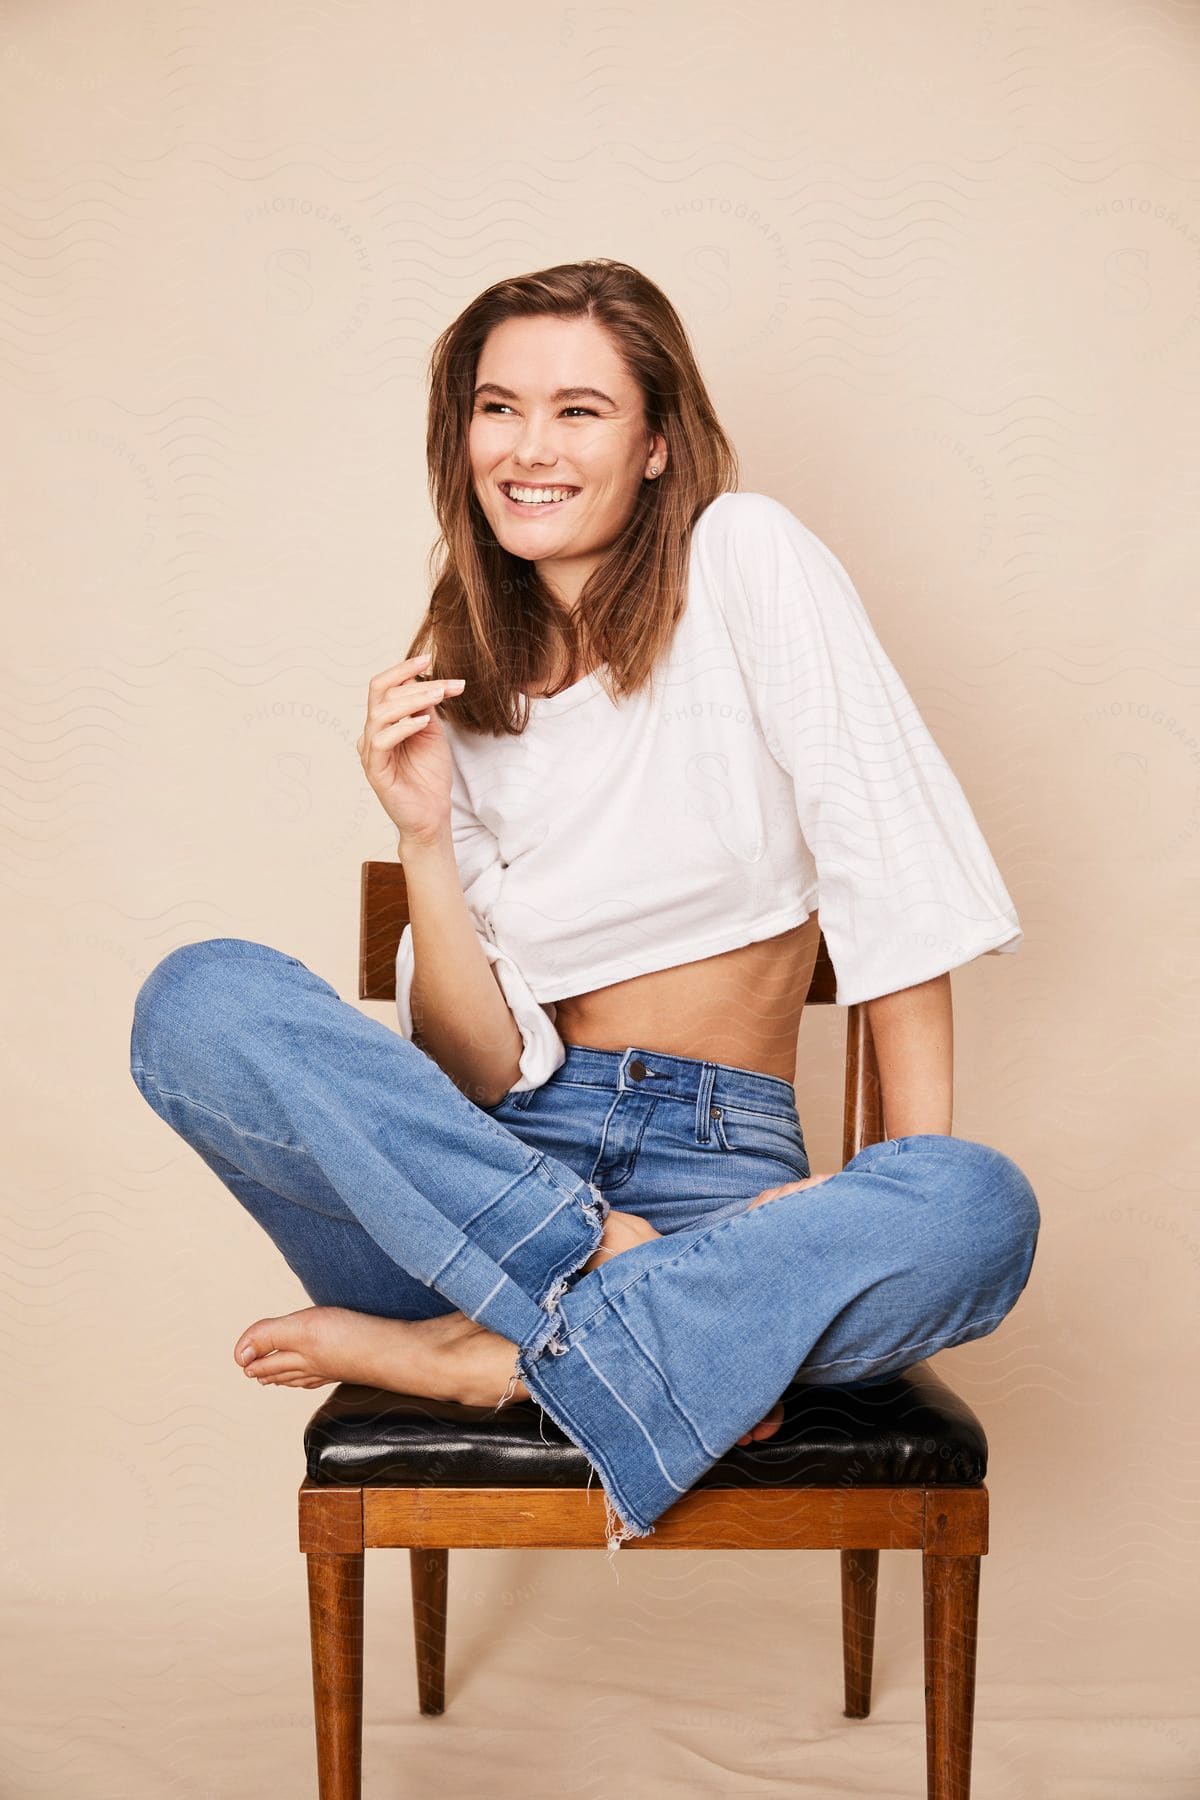 Smiling model sitting with crossed legs in a chair in a studio.